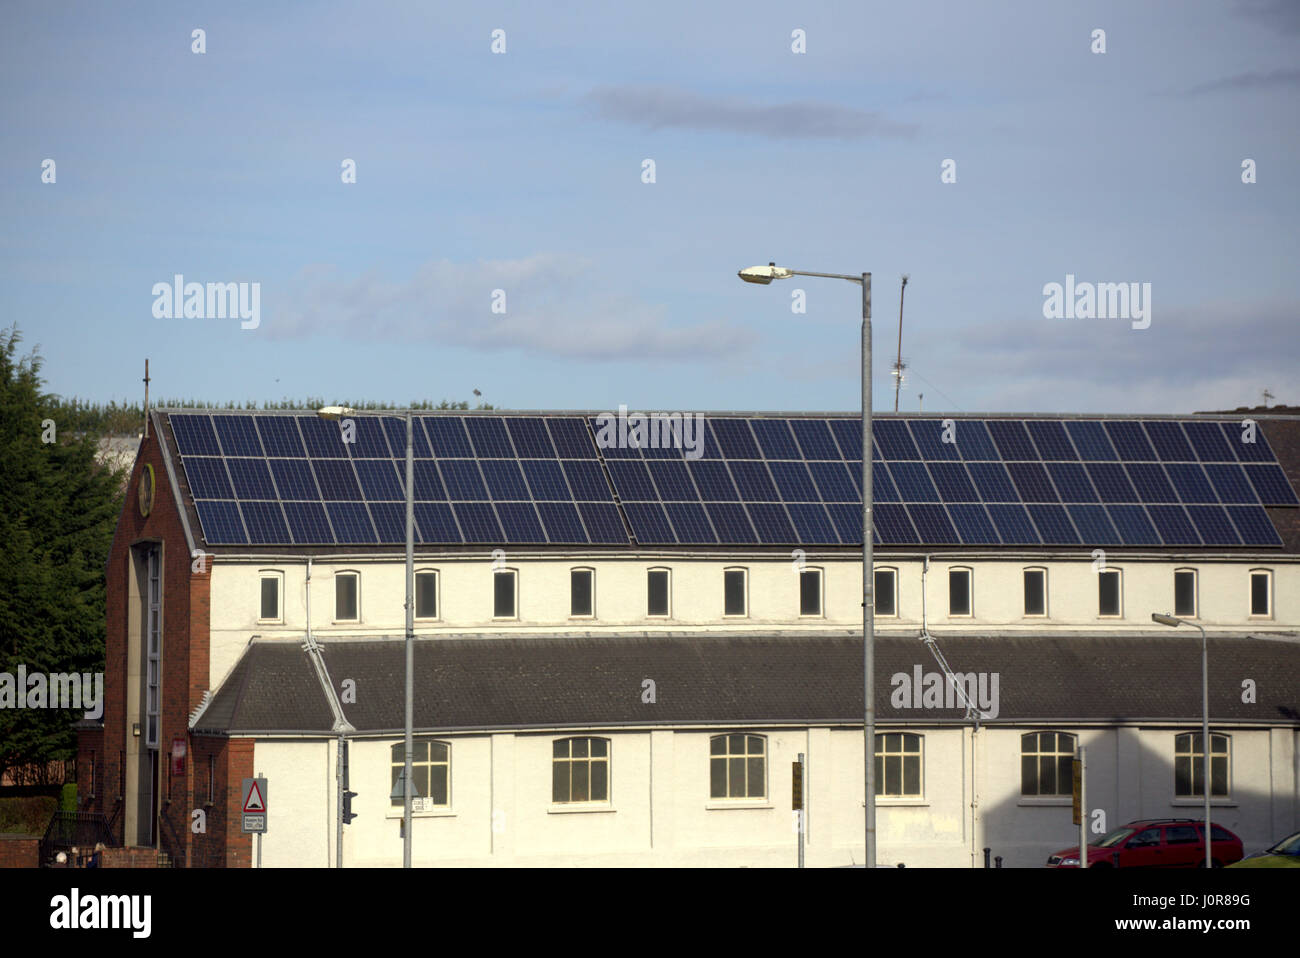 St Rochs Glasgow church chapel with green electricity solar panels covering roof Stock Photo